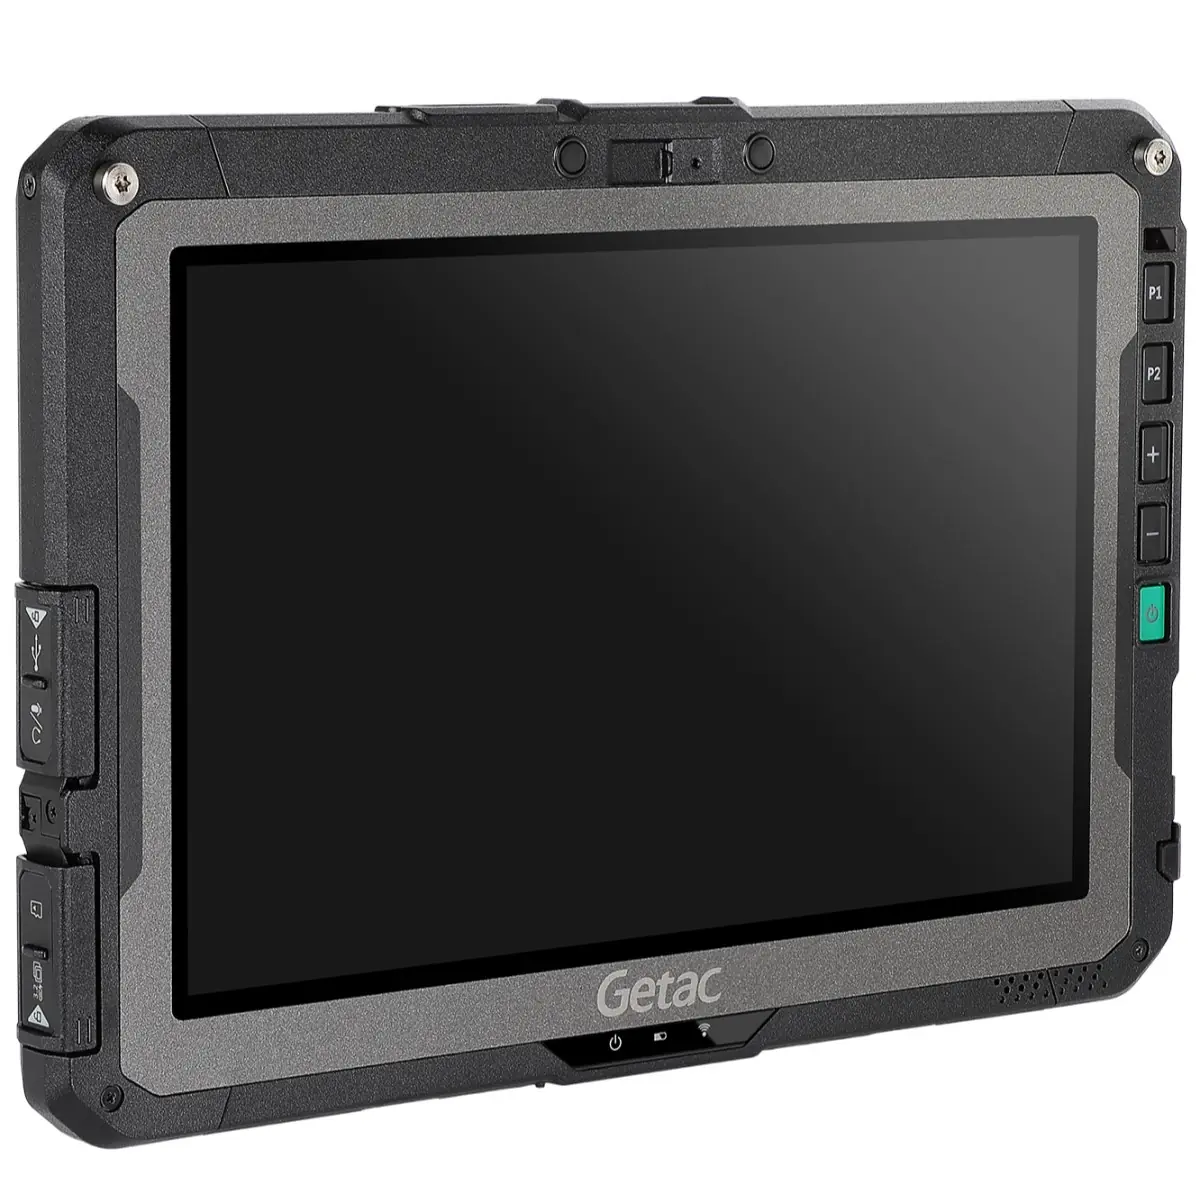 Android Getac